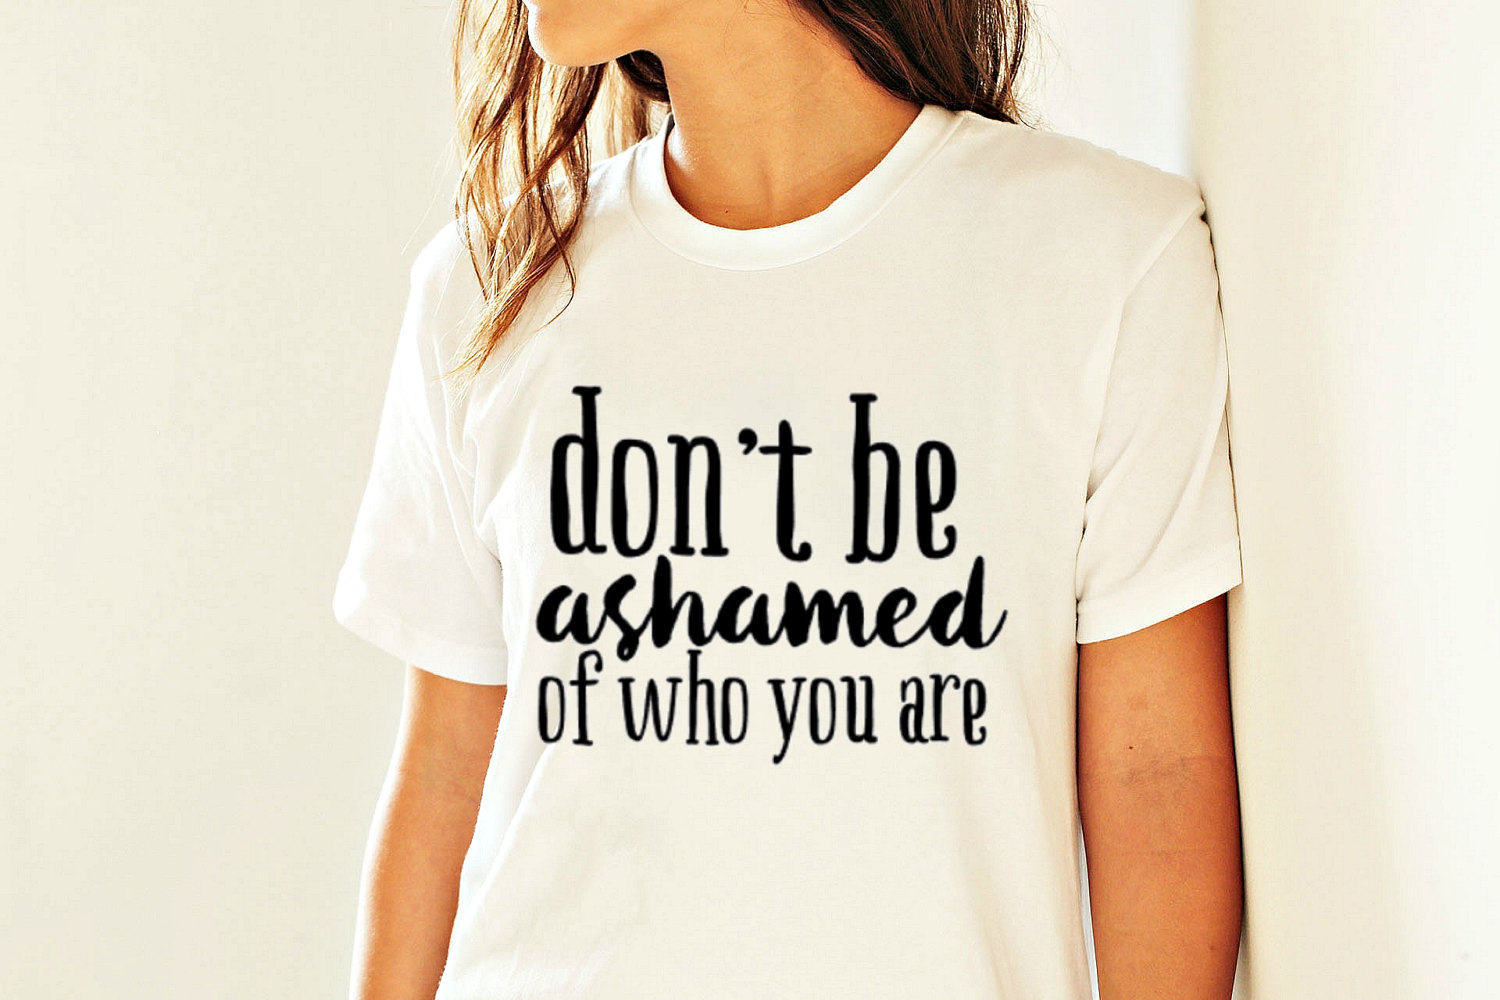 Don't be ashamed of who you are t-shirt for an lgbtq teenager